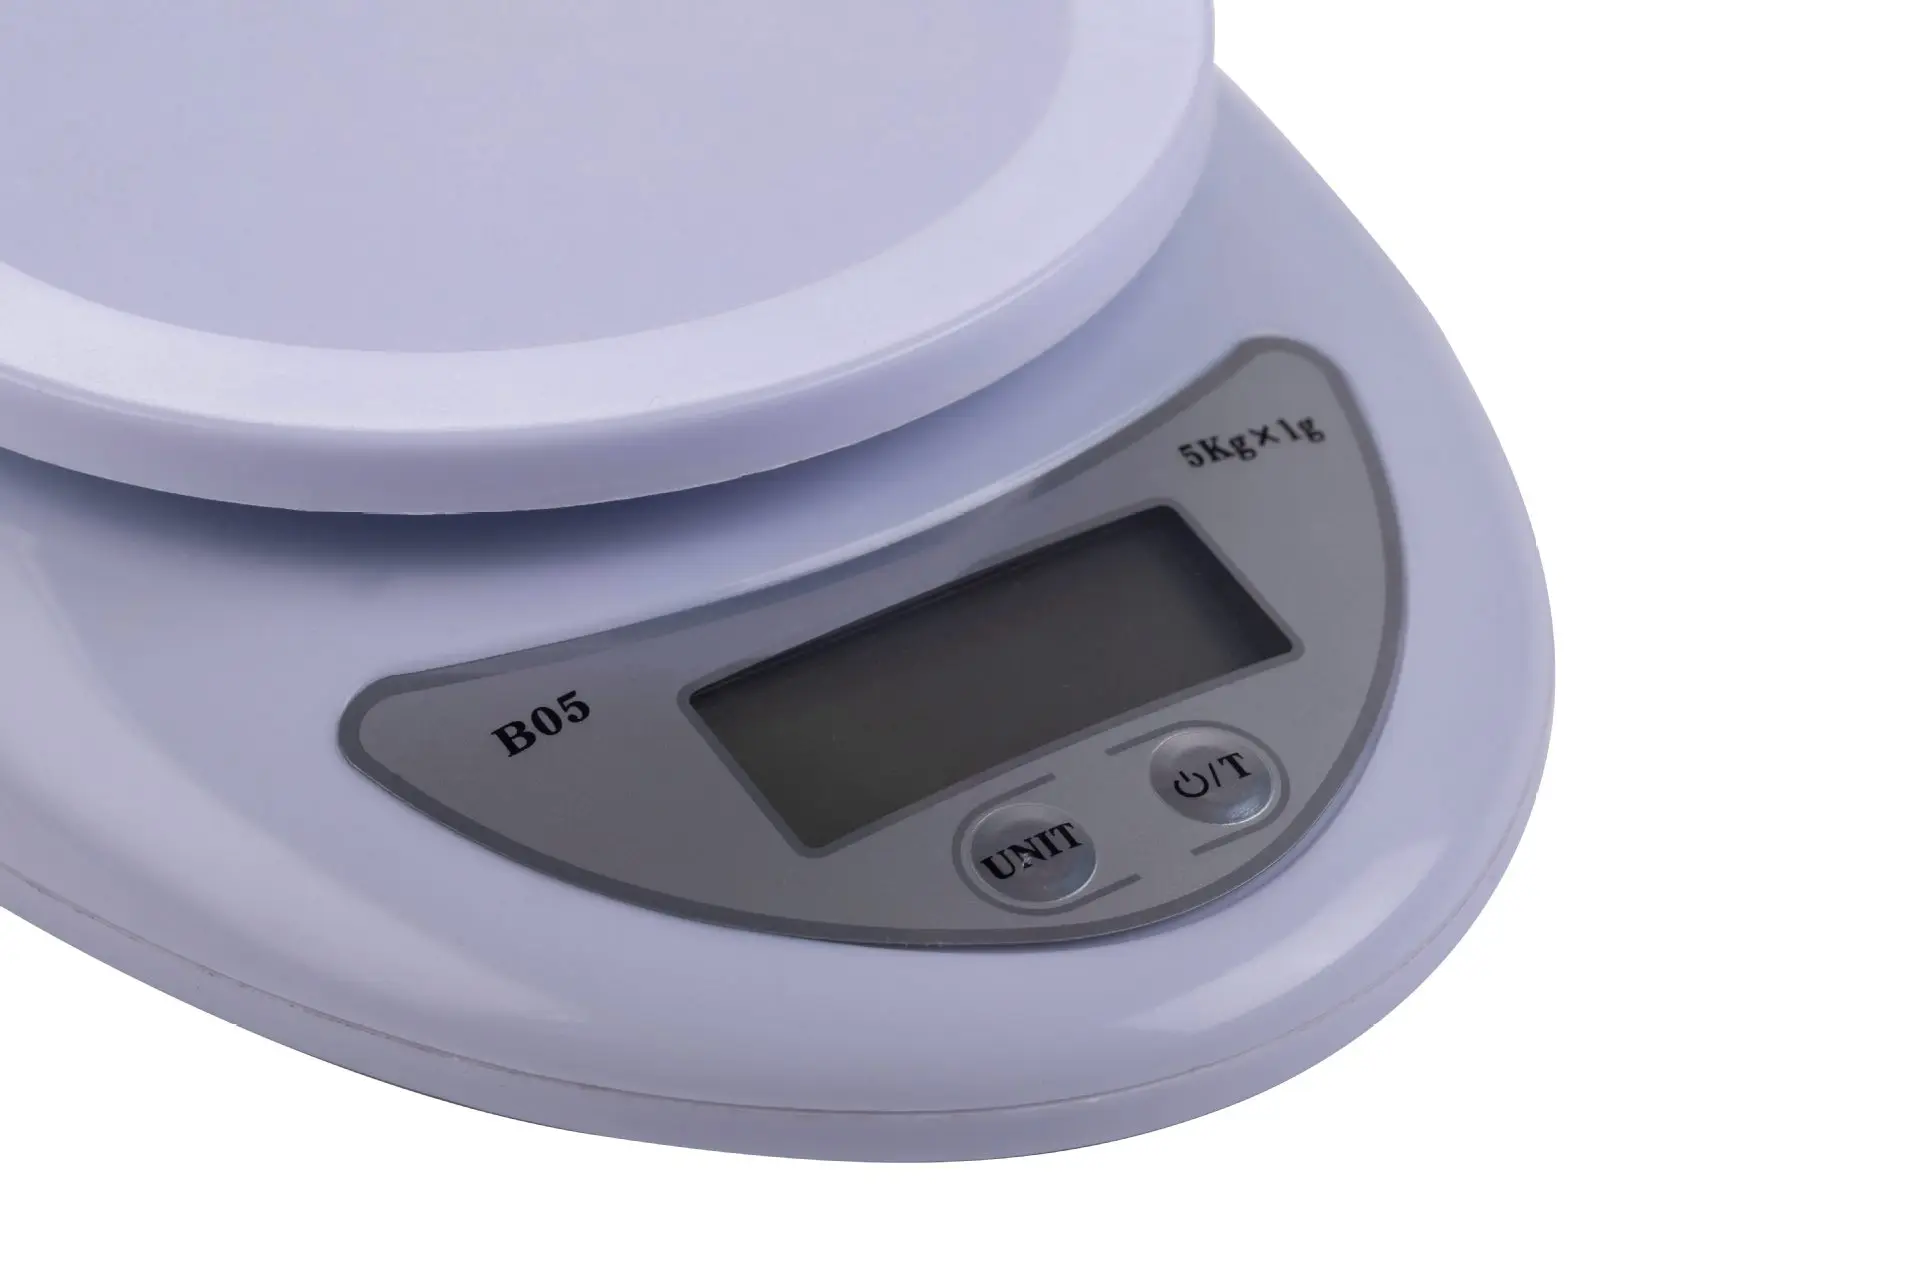 B05 Electronic Kitchen Weight Scale Digital with Removable Bowl